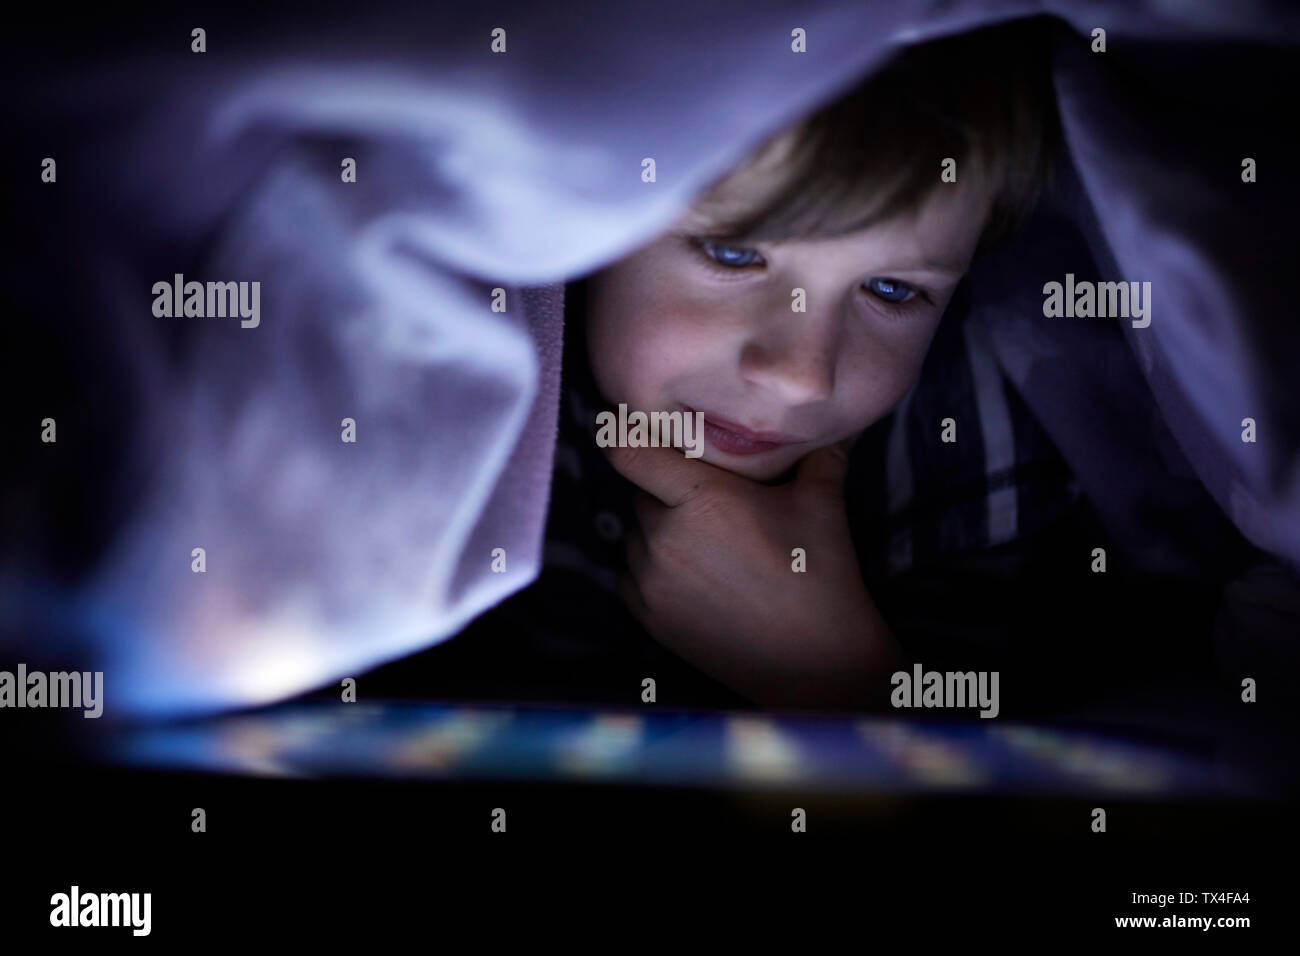 Little boy playing secretly with his digital tablet, hidden under blanket Stock Photo